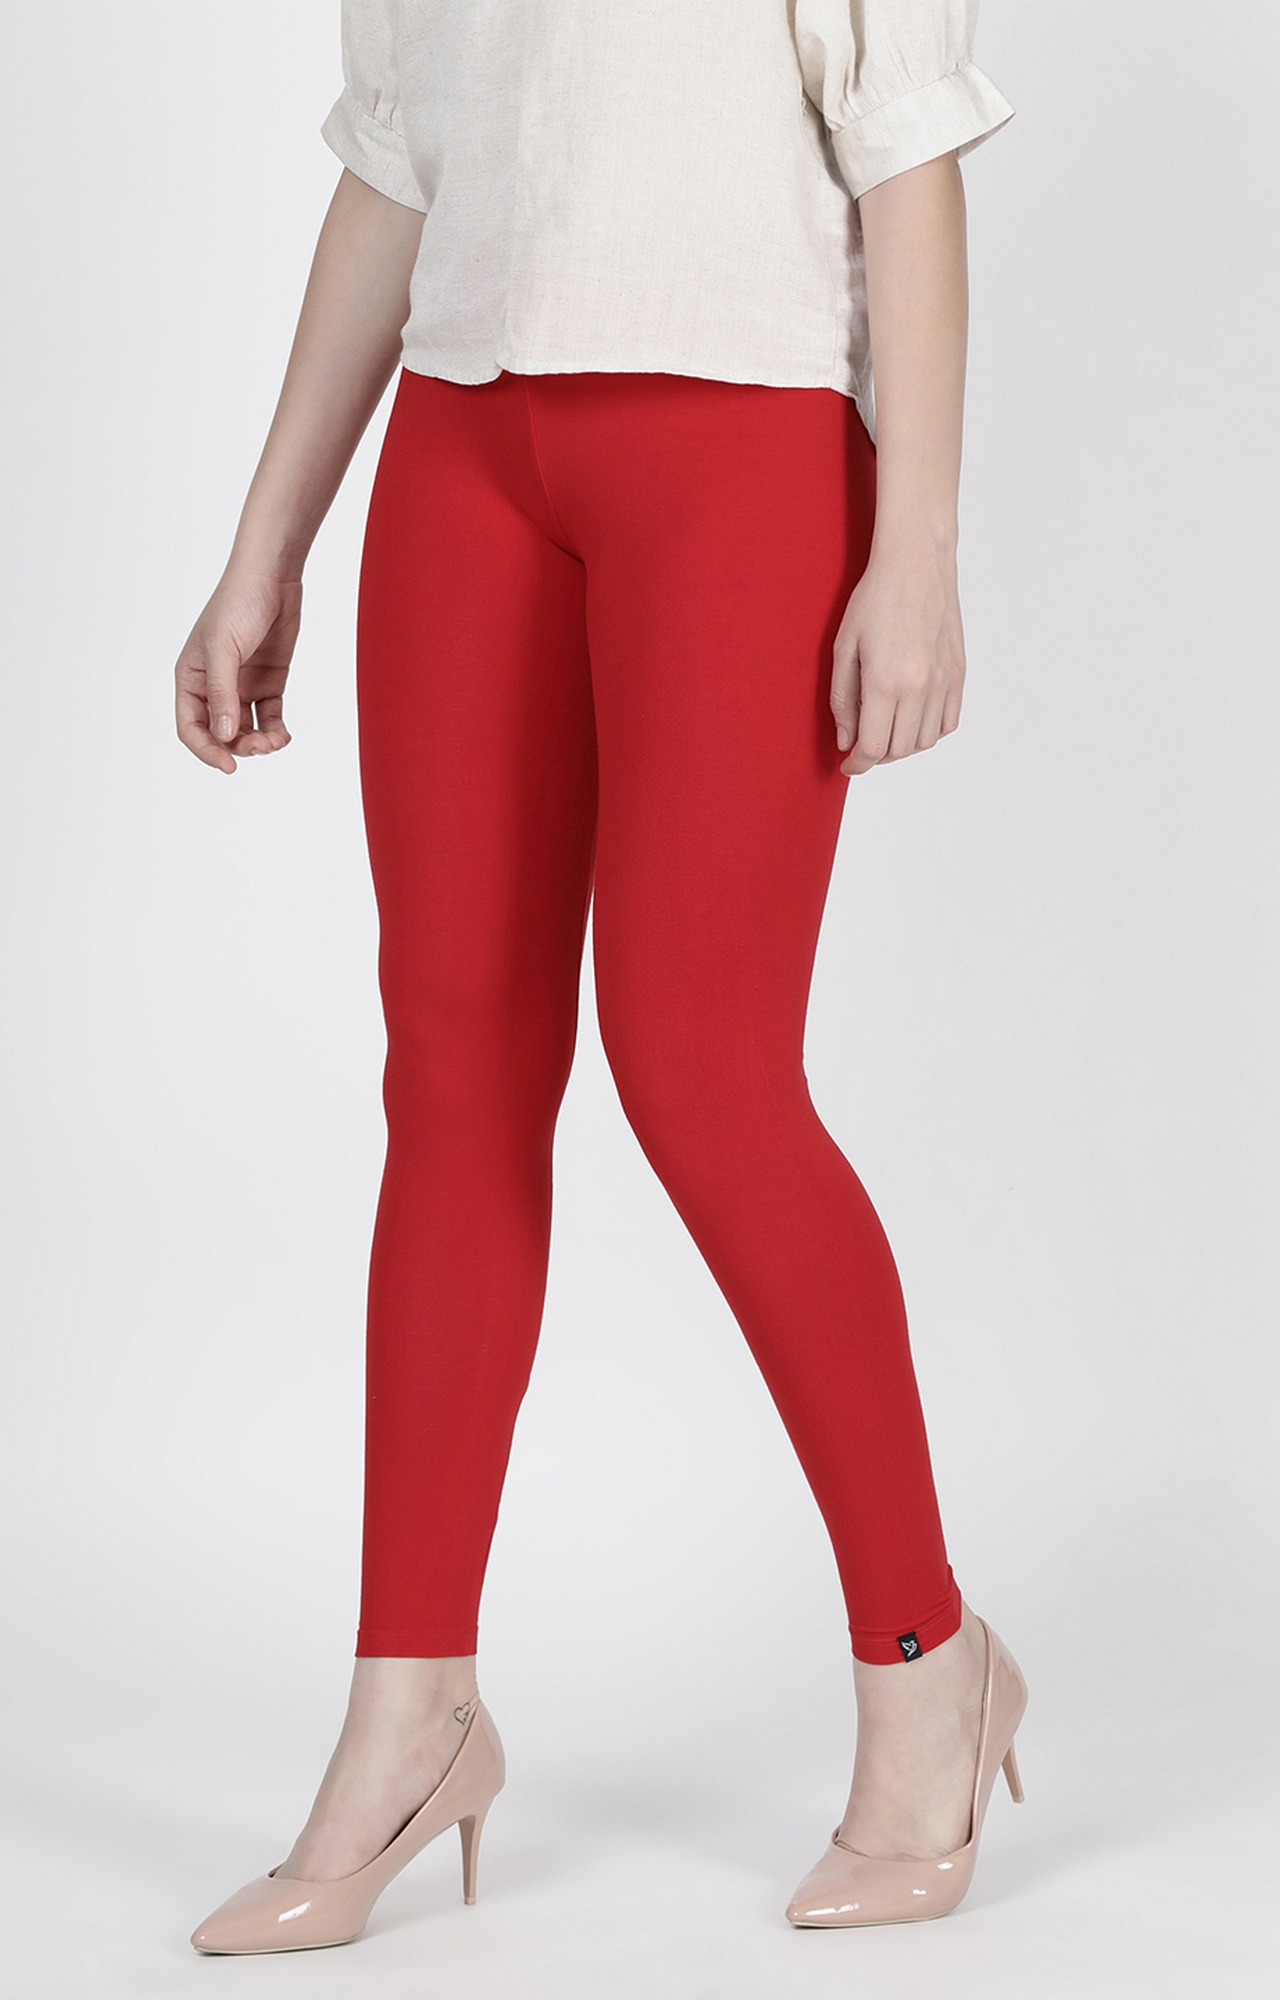 Buy TWIN BIRDS Women Red Solid Cotton Ankle-Length Leggings Online